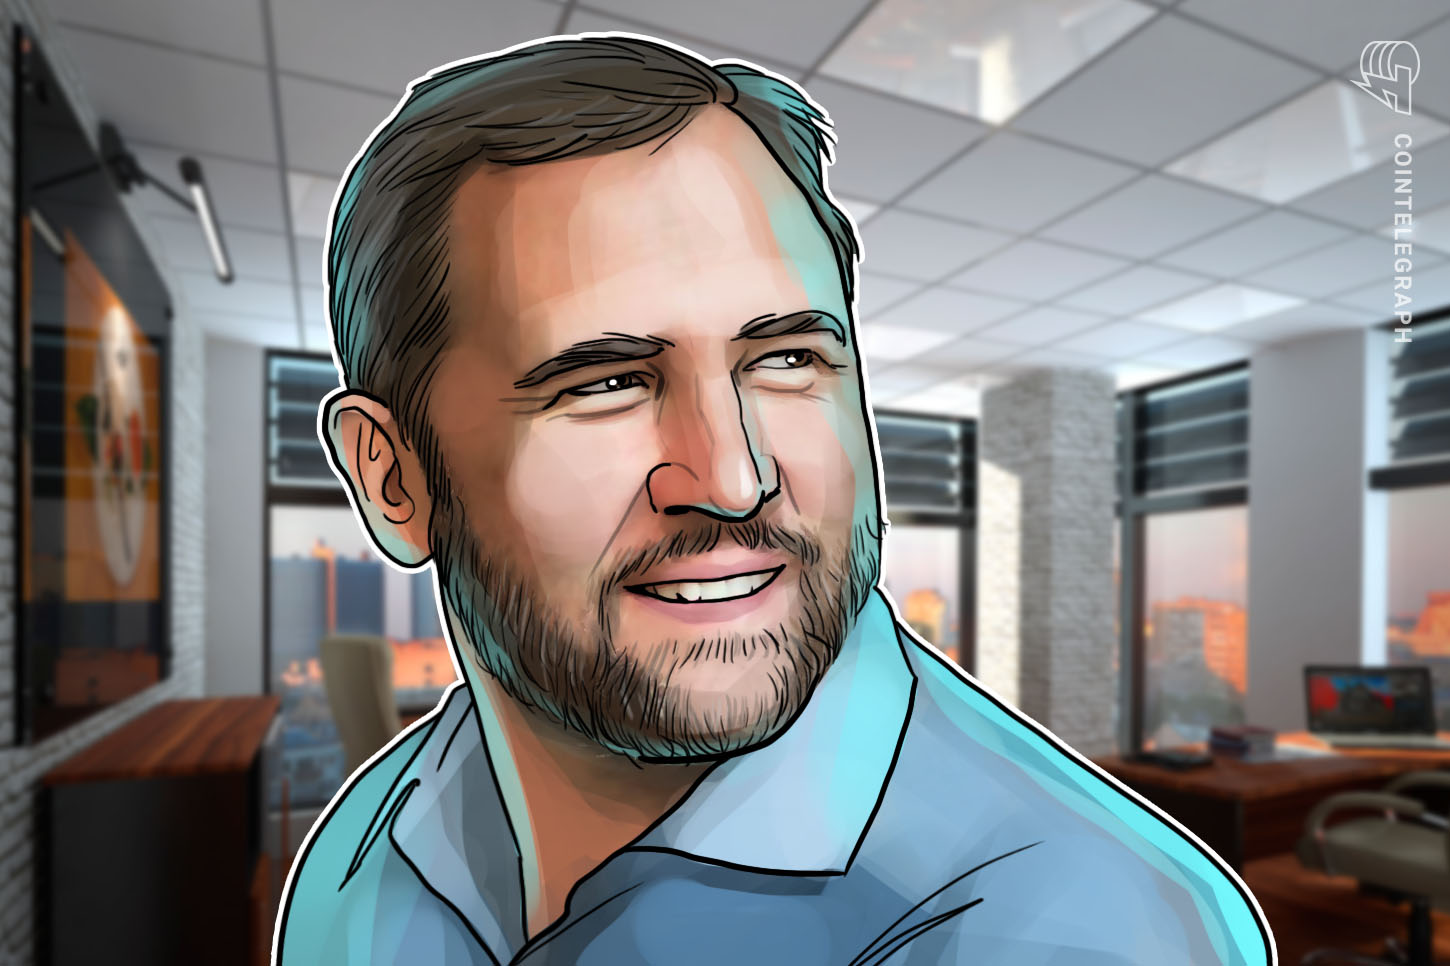 95% of Ripple’s prospects are usually not from the US, CEO Garglinghouse says